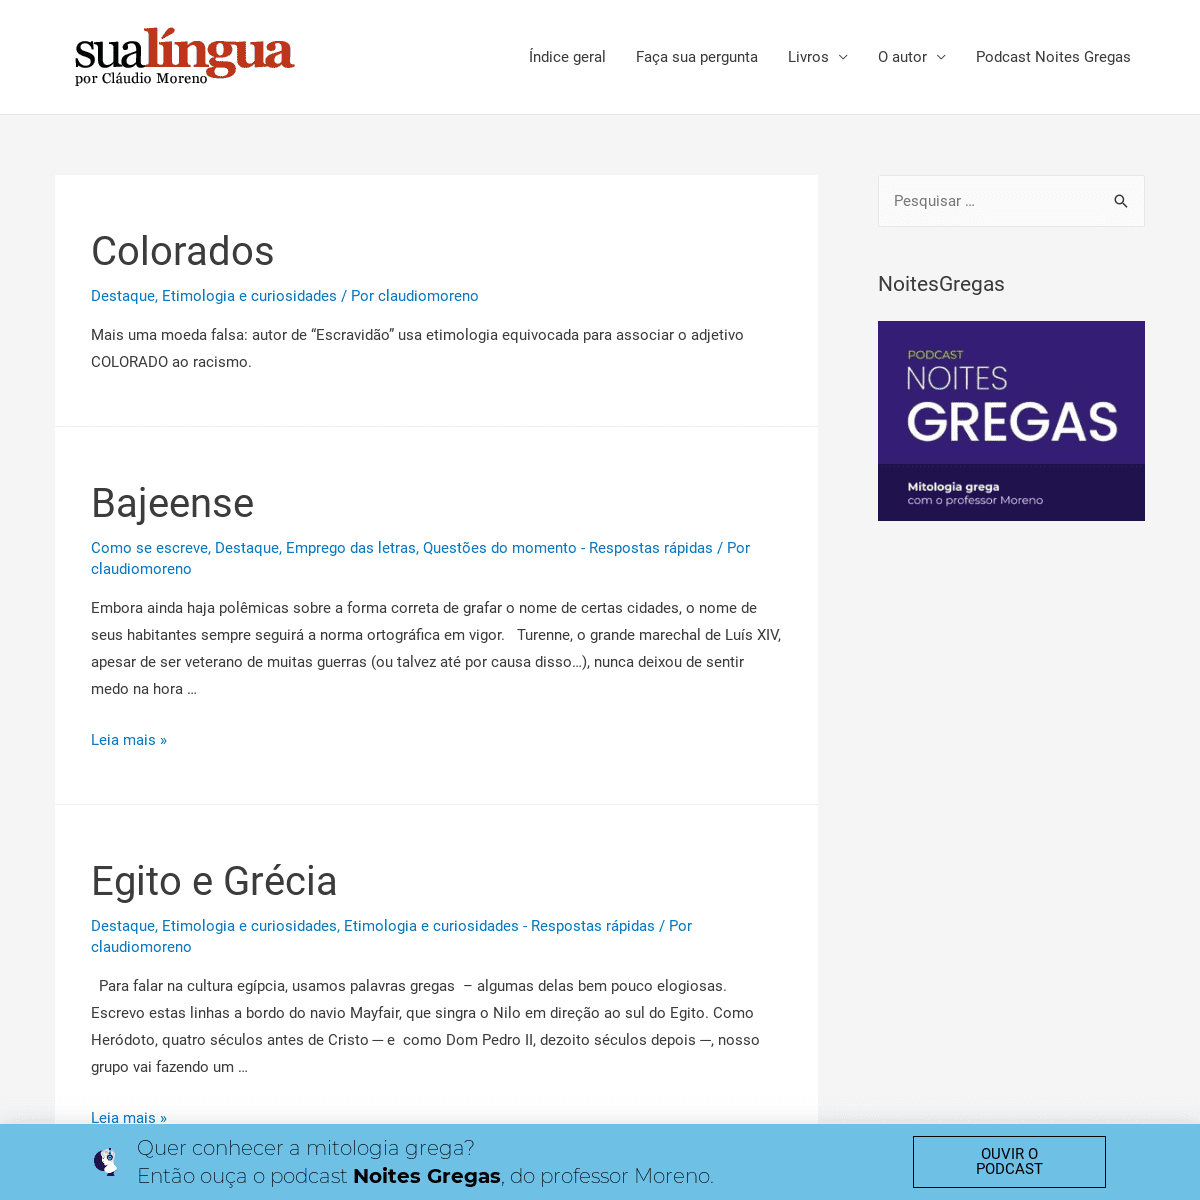 A complete backup of sualingua.com.br